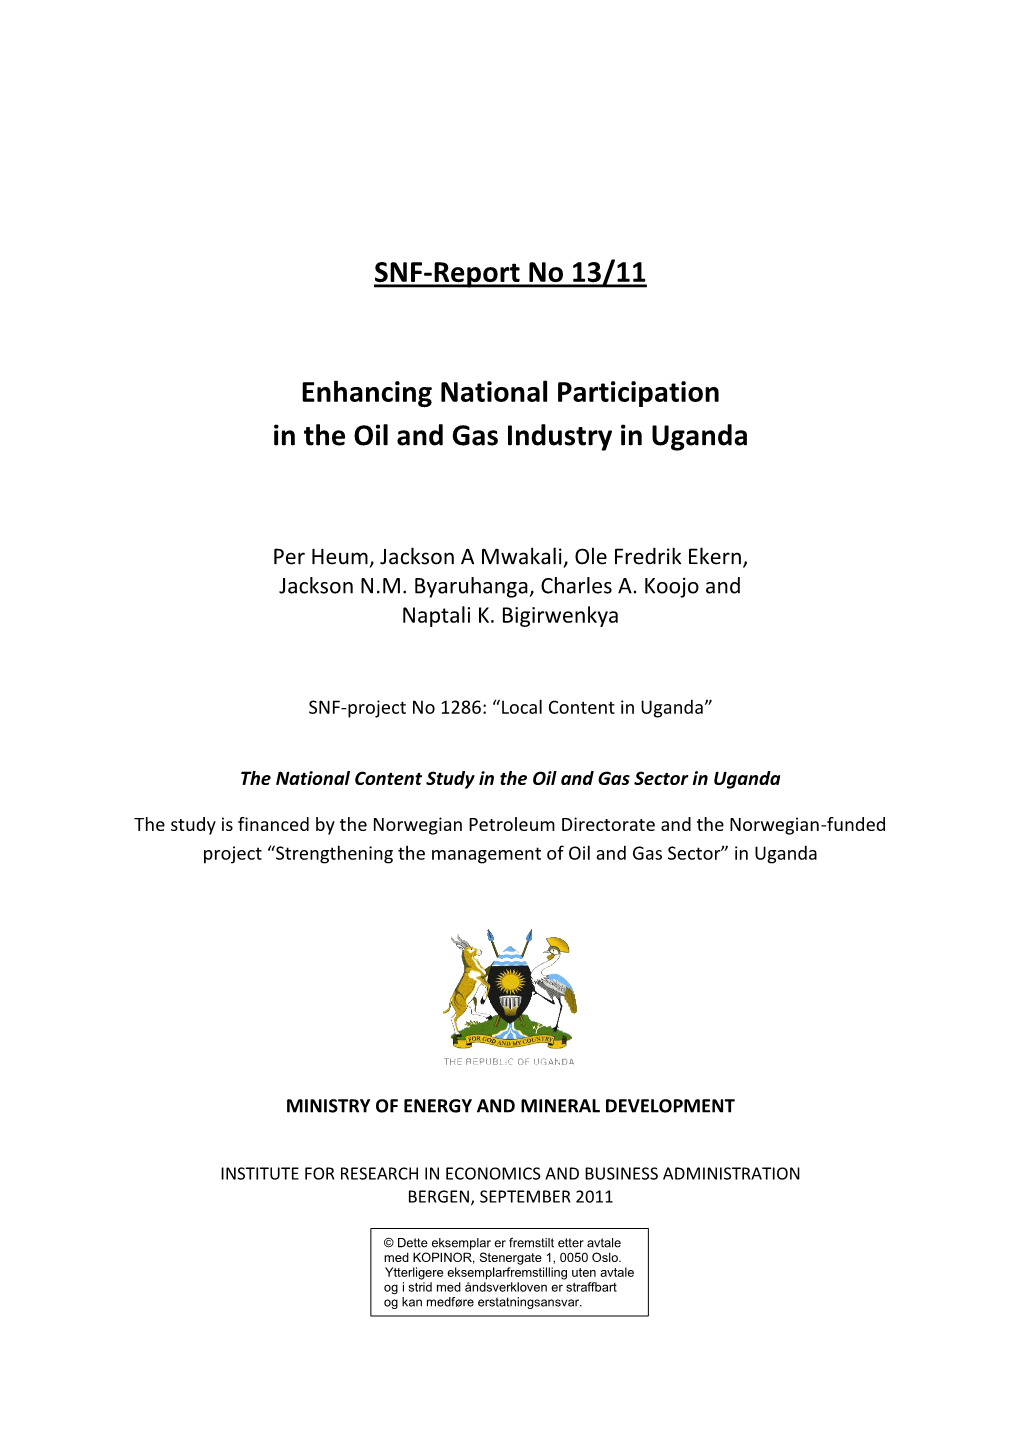 SNF-Report No 13/11 Enhancing National Participation in the Oil And